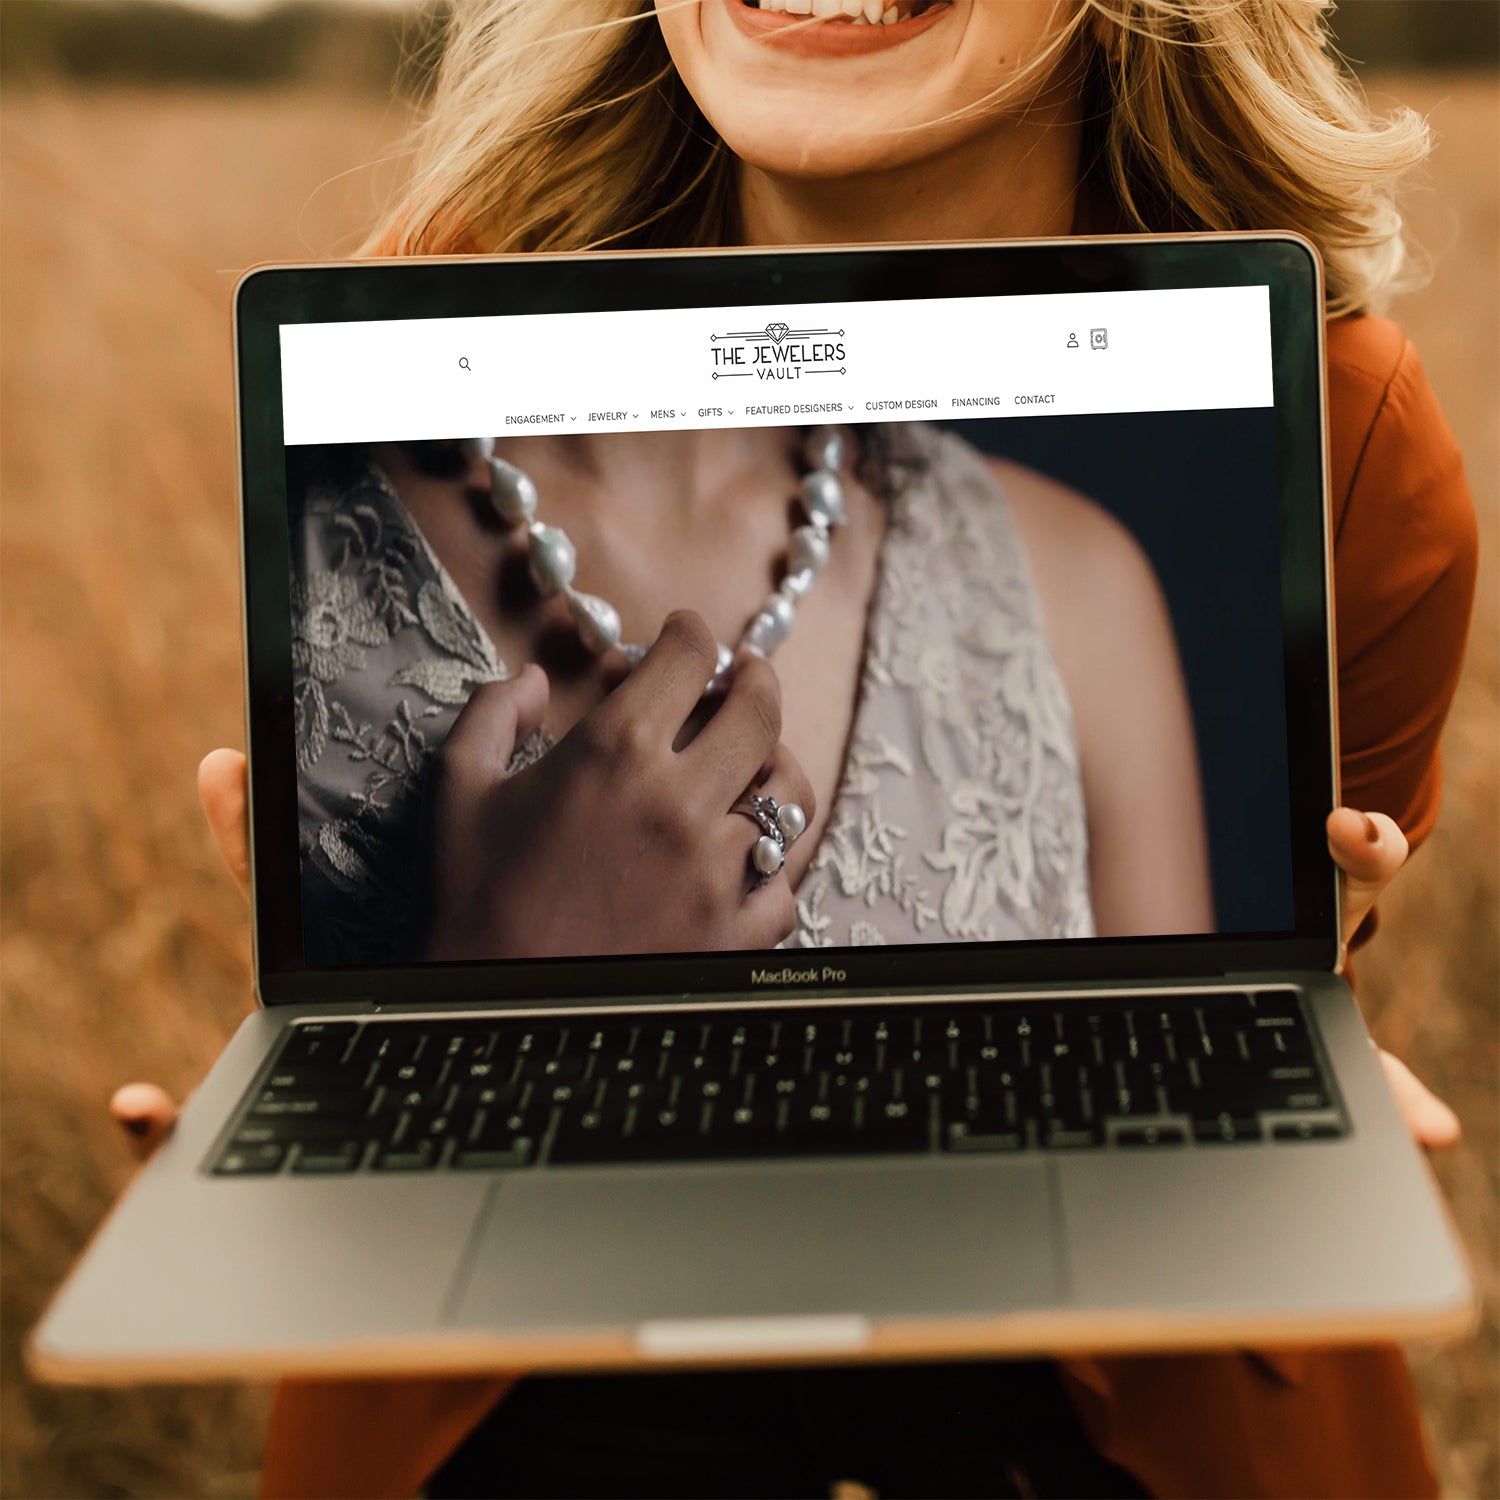 Woman holding open a laptop with the homepage of The Jewelers Vault on the screen.